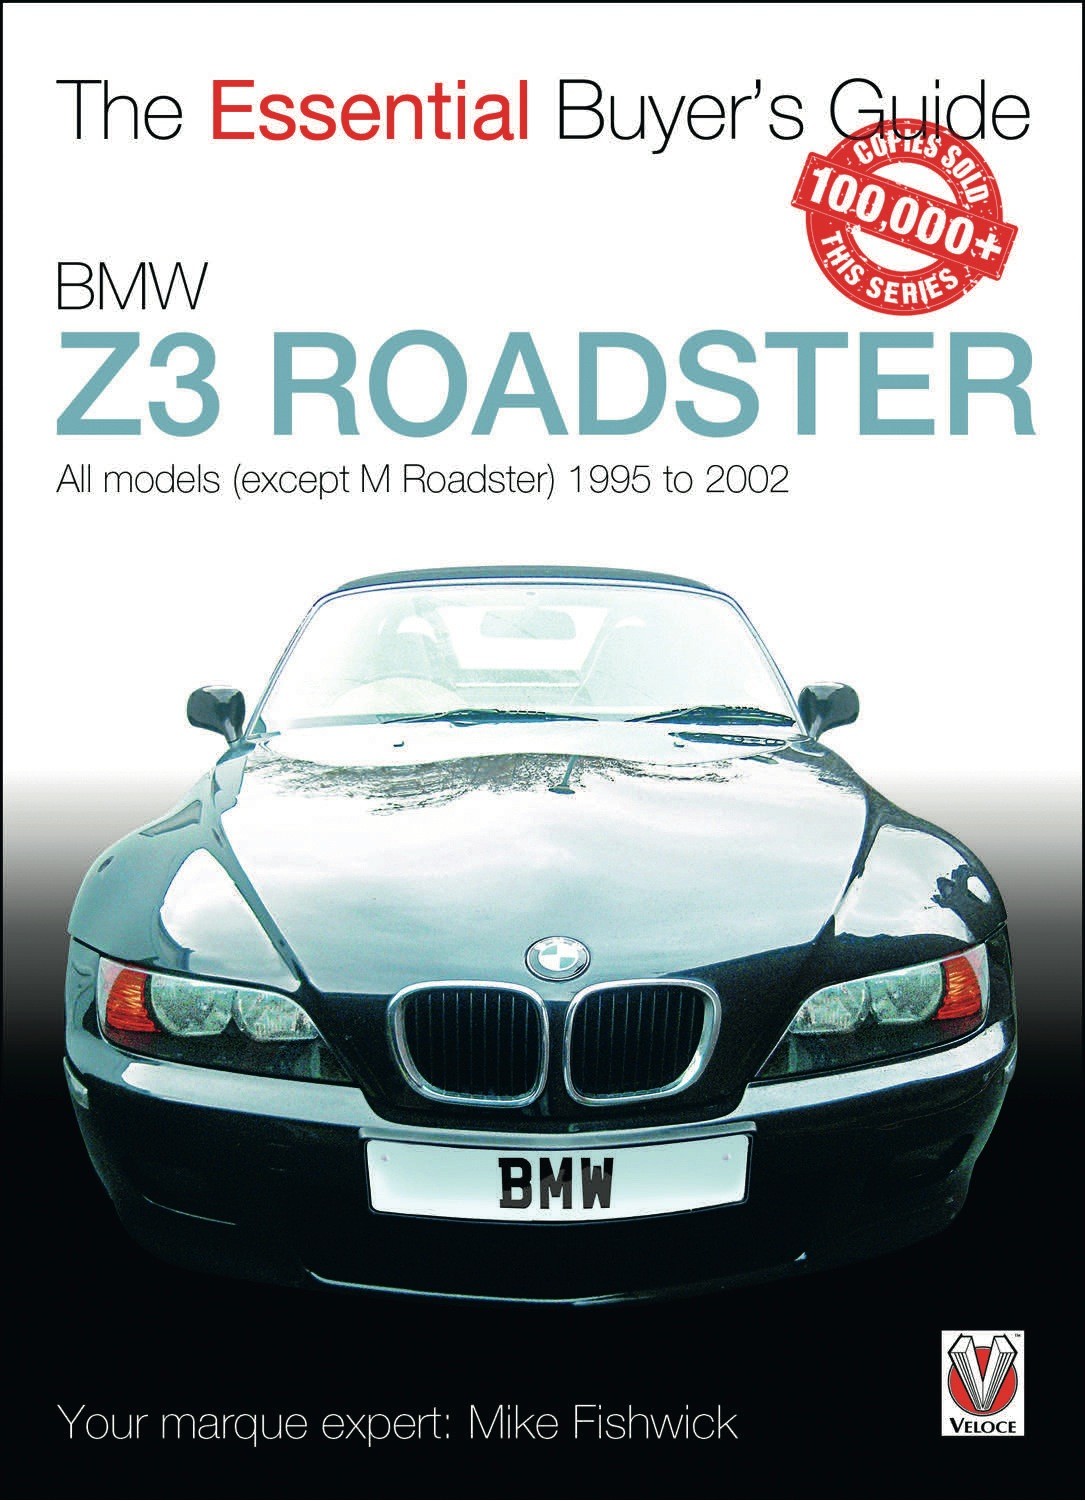 The essential buyer’s guide to BMW Z3 Roadster 1995-2002